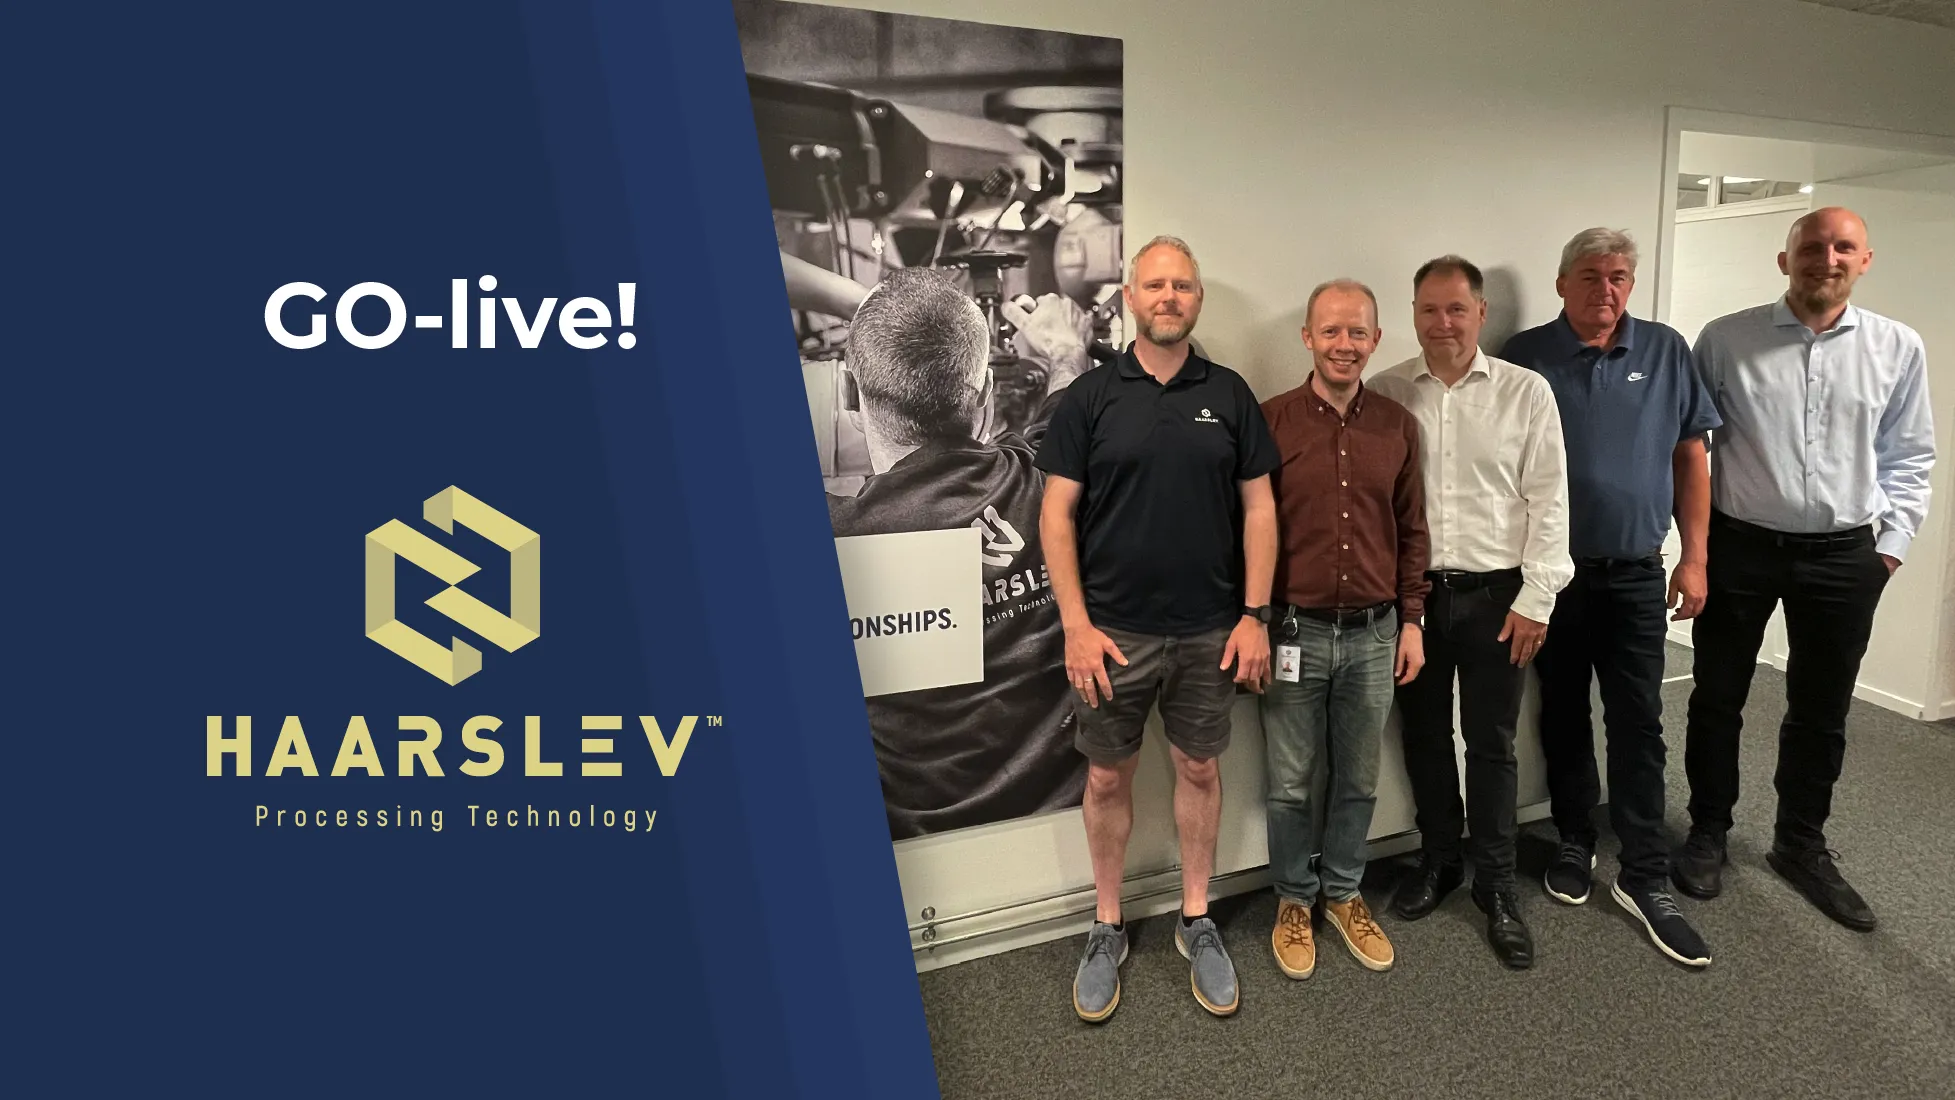 Haarslev has gone live with Freshservice